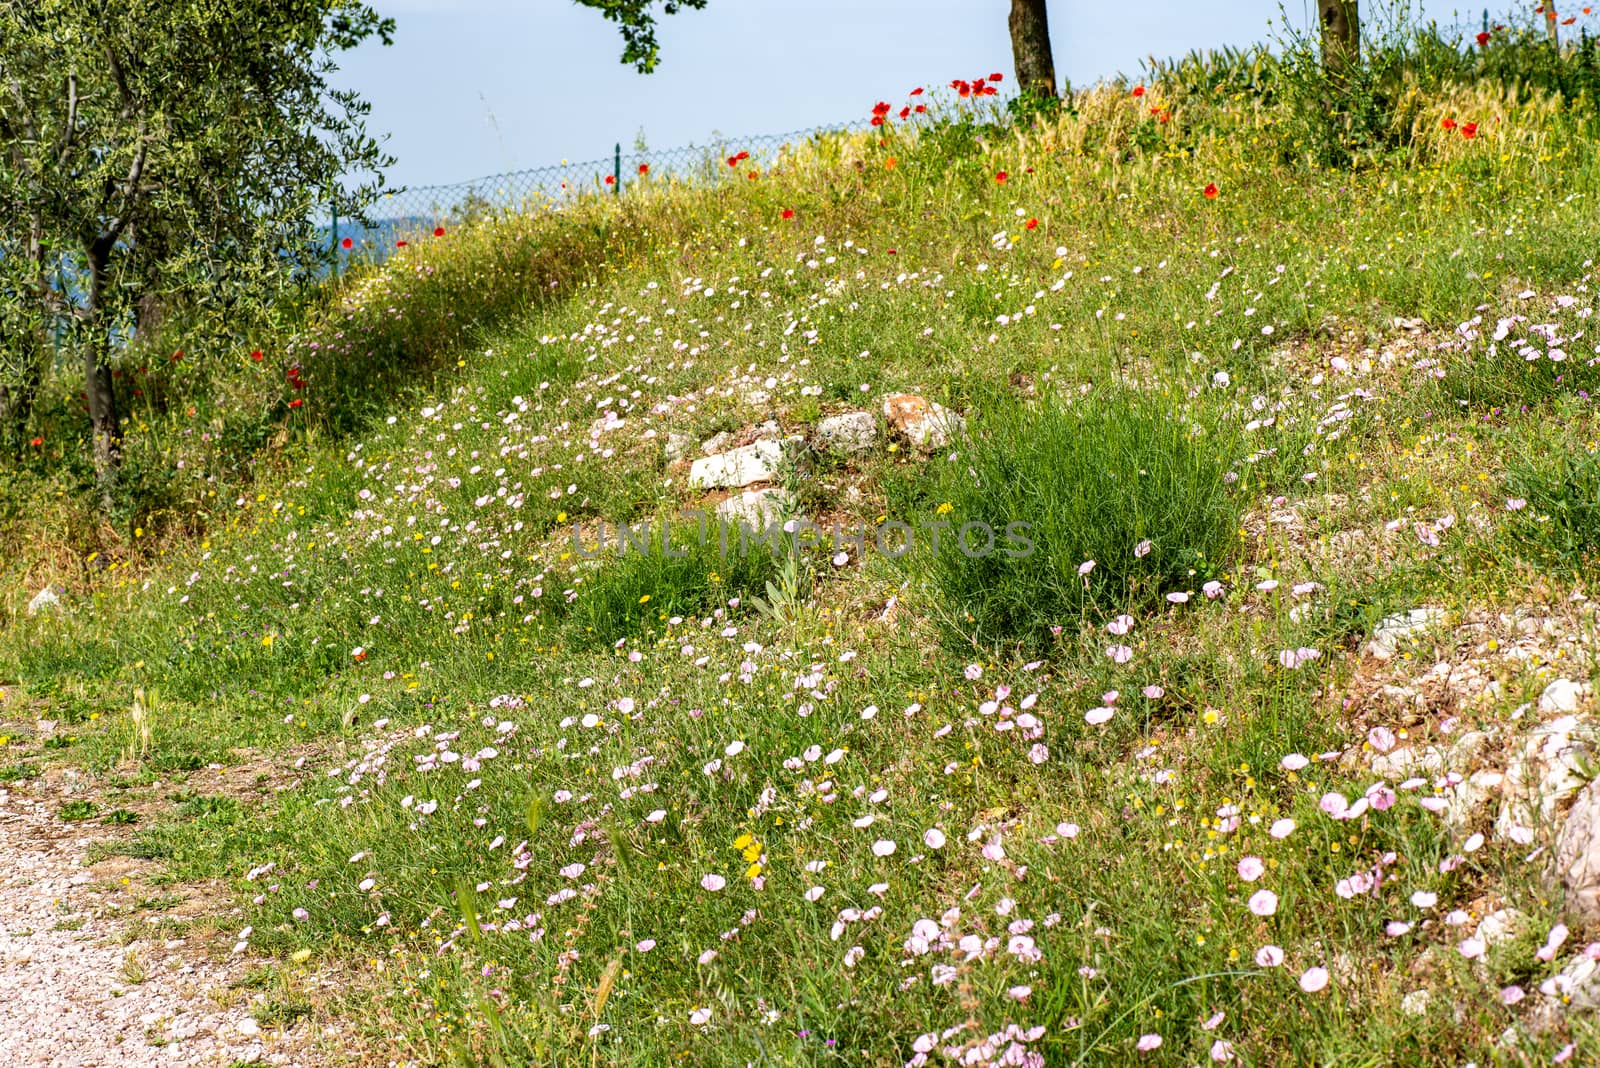 FLOWERED MEADOW FROM DAISIES AND WILD FLOWERS